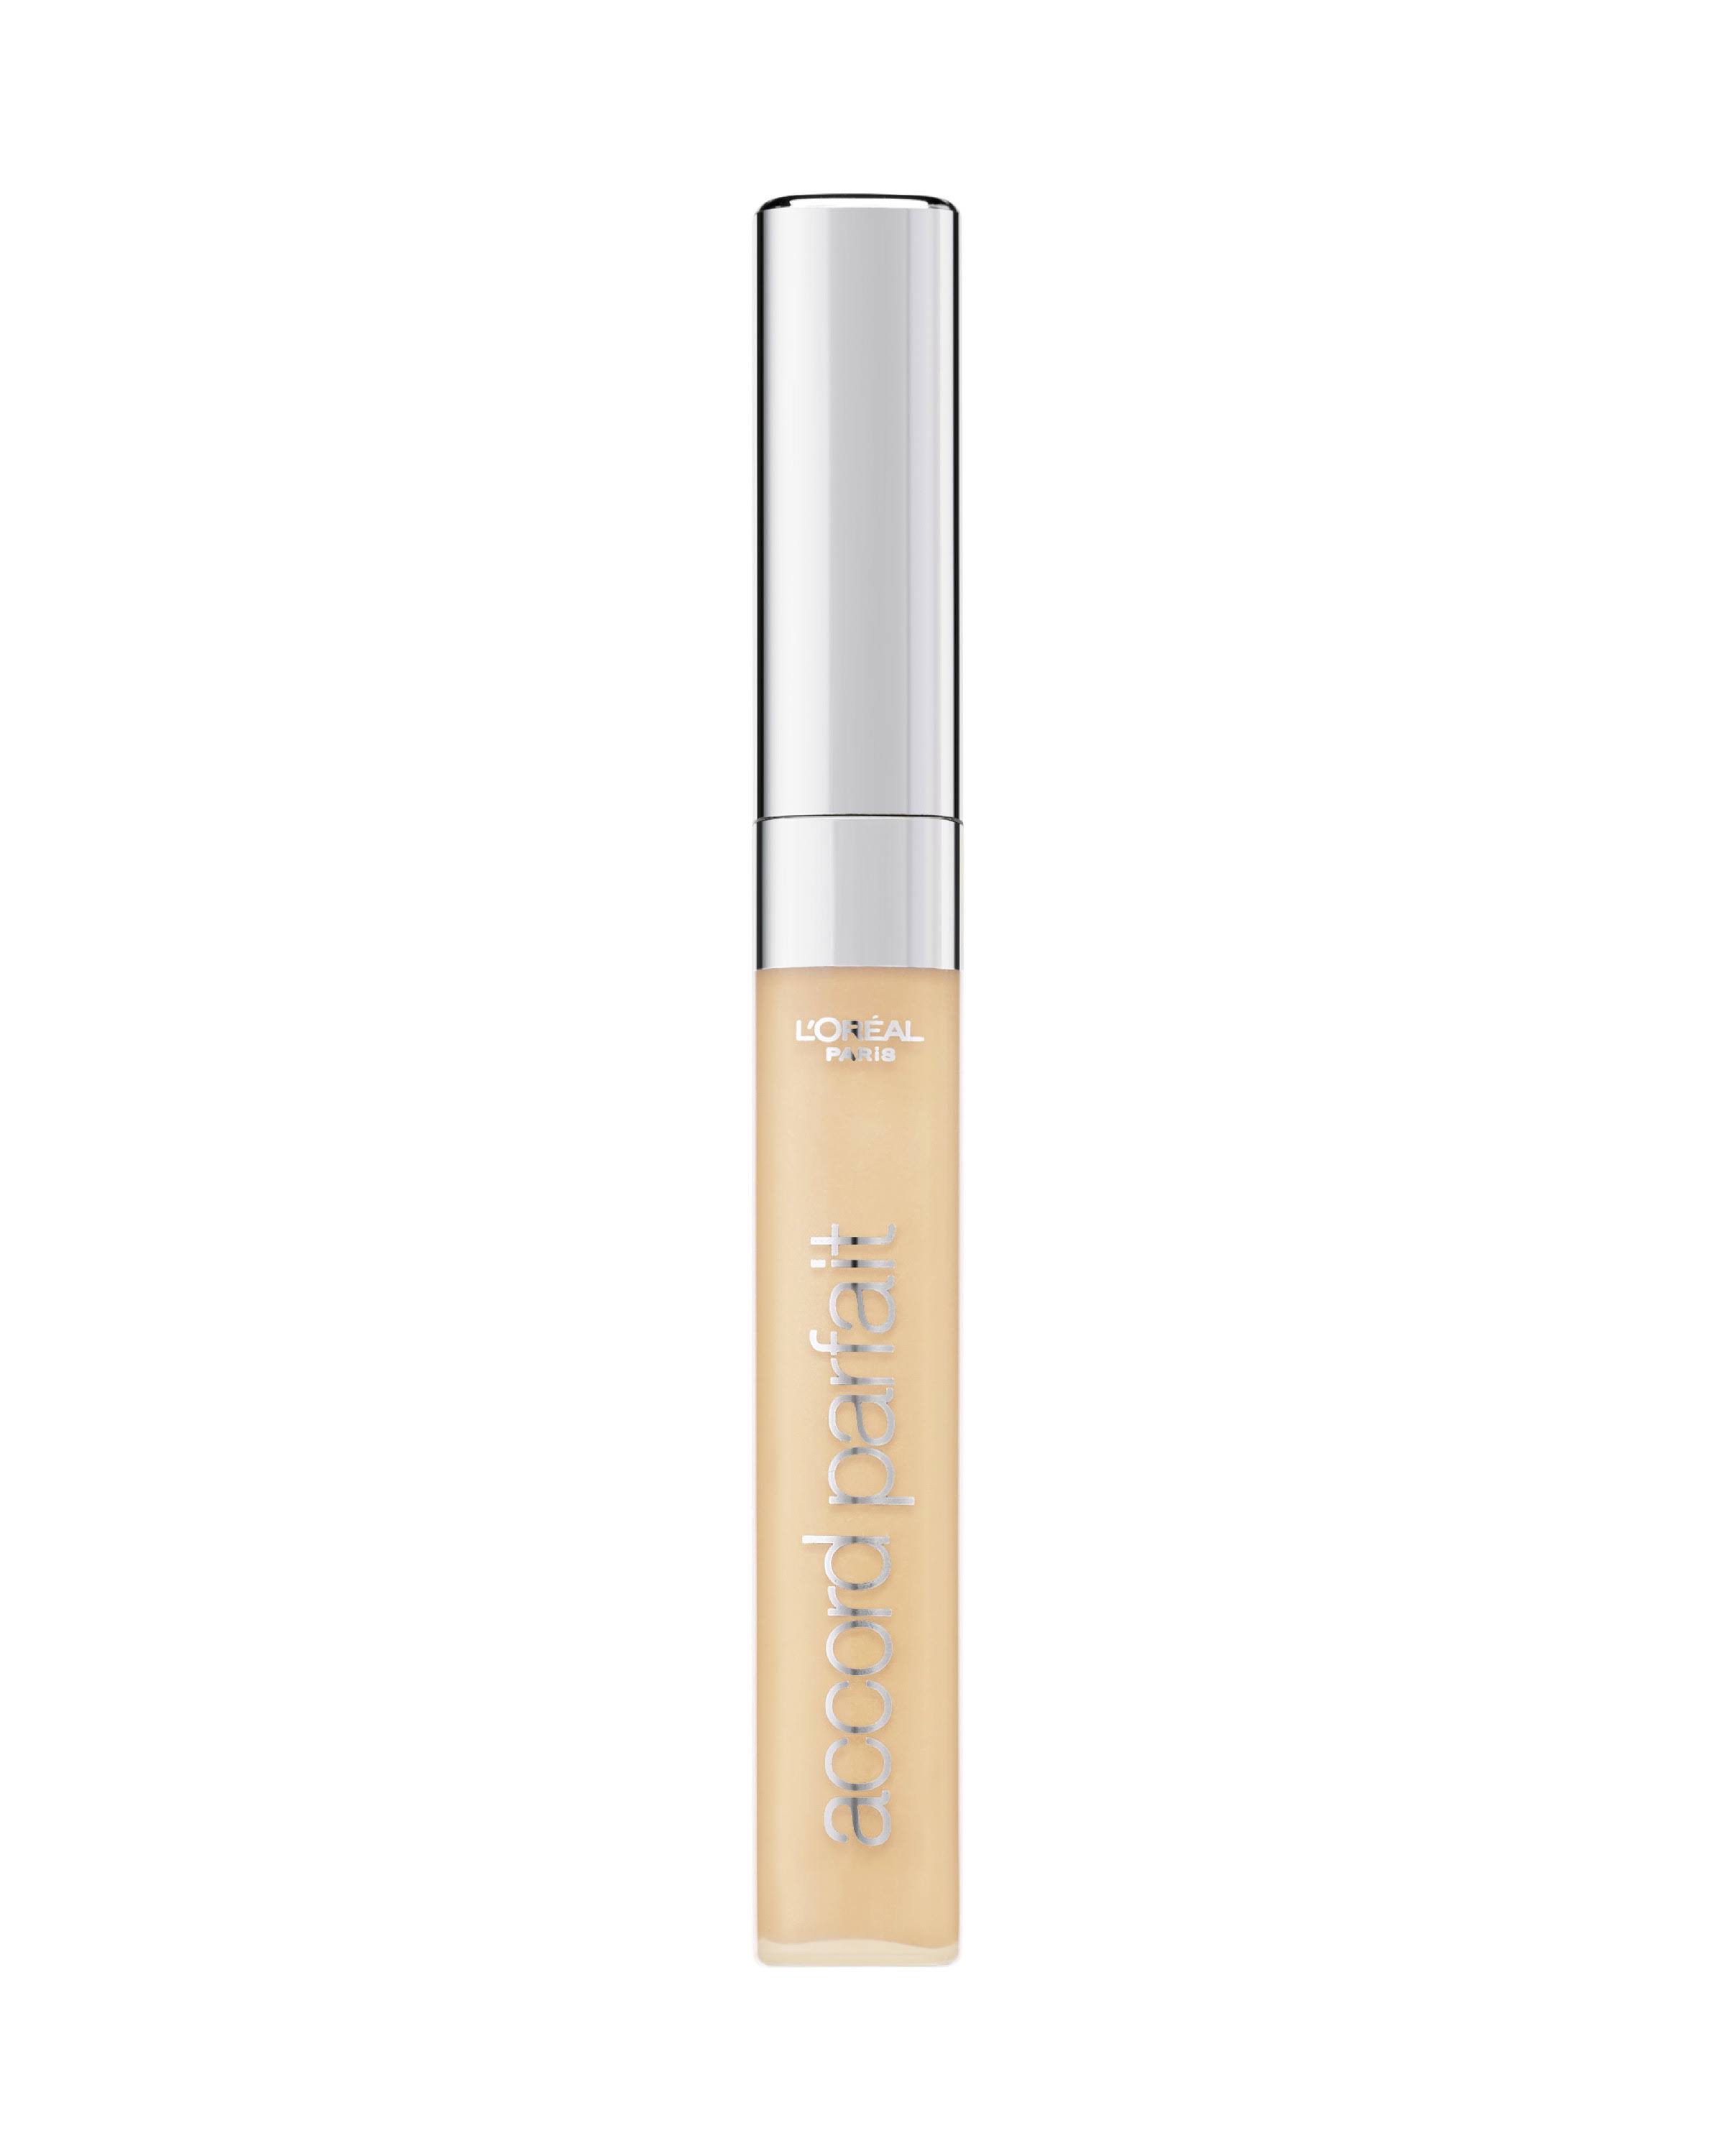 L'Oreal Paris True Match The One Concealer - 1N Ivory